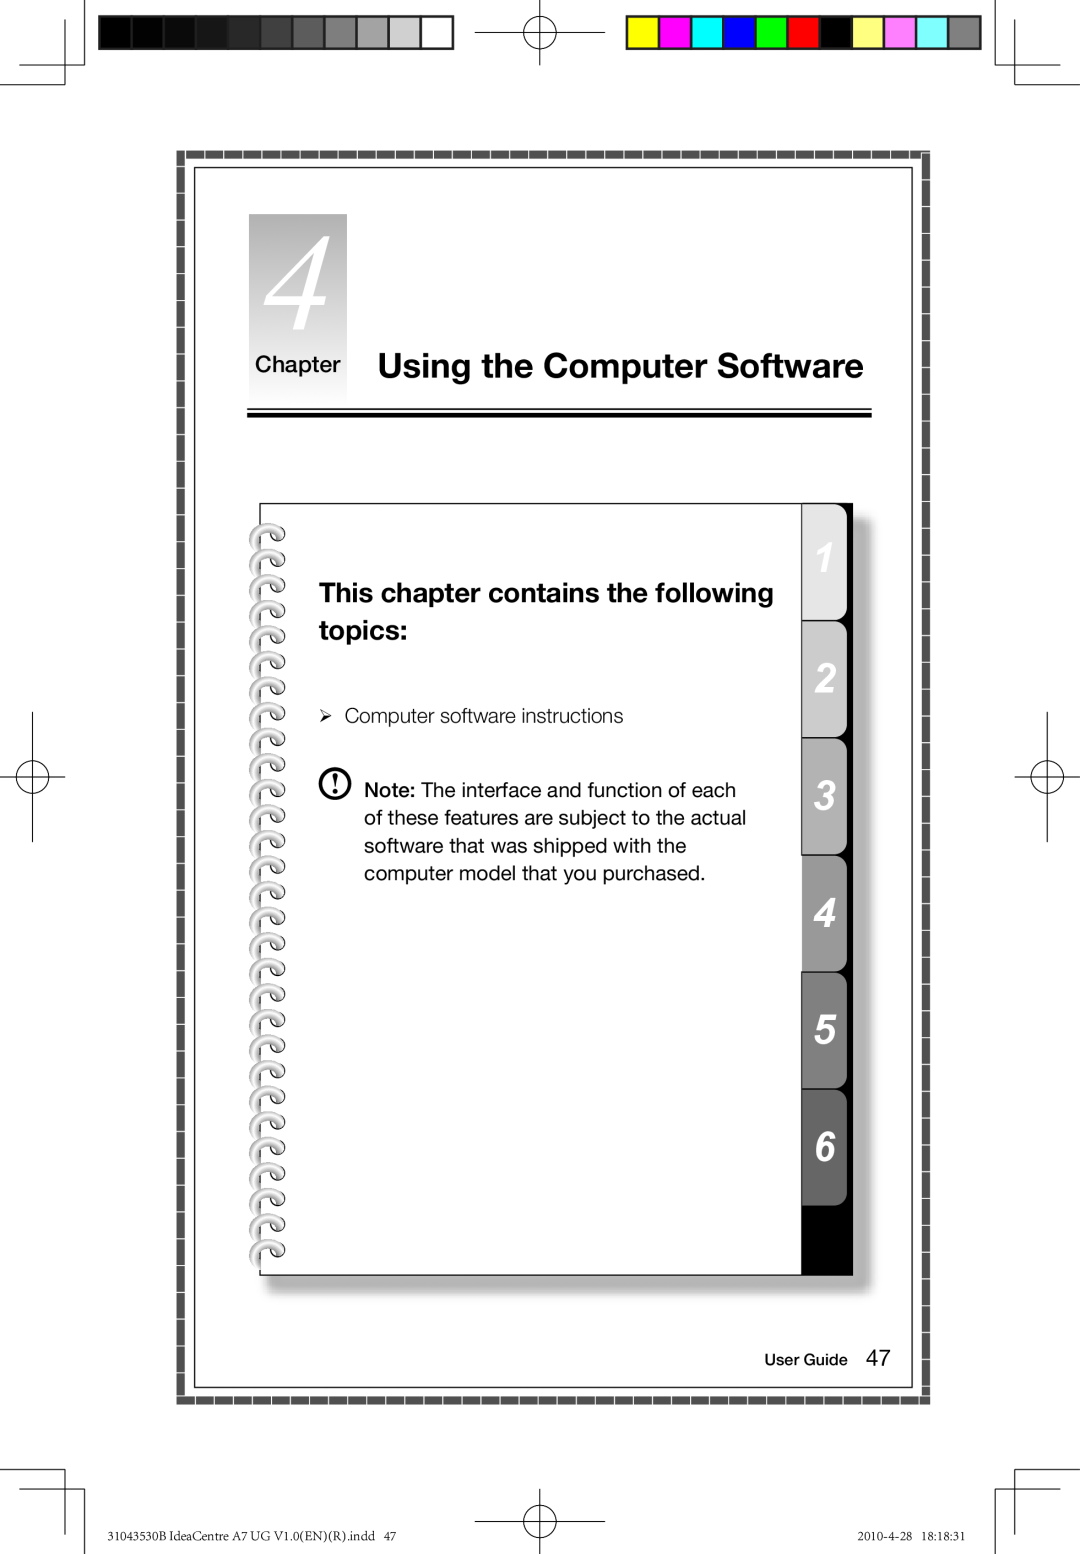 Lenovo A7 manual Chapter Using the Computer Software, This chapter contains the following topics, User Guide, 2010-4-28 